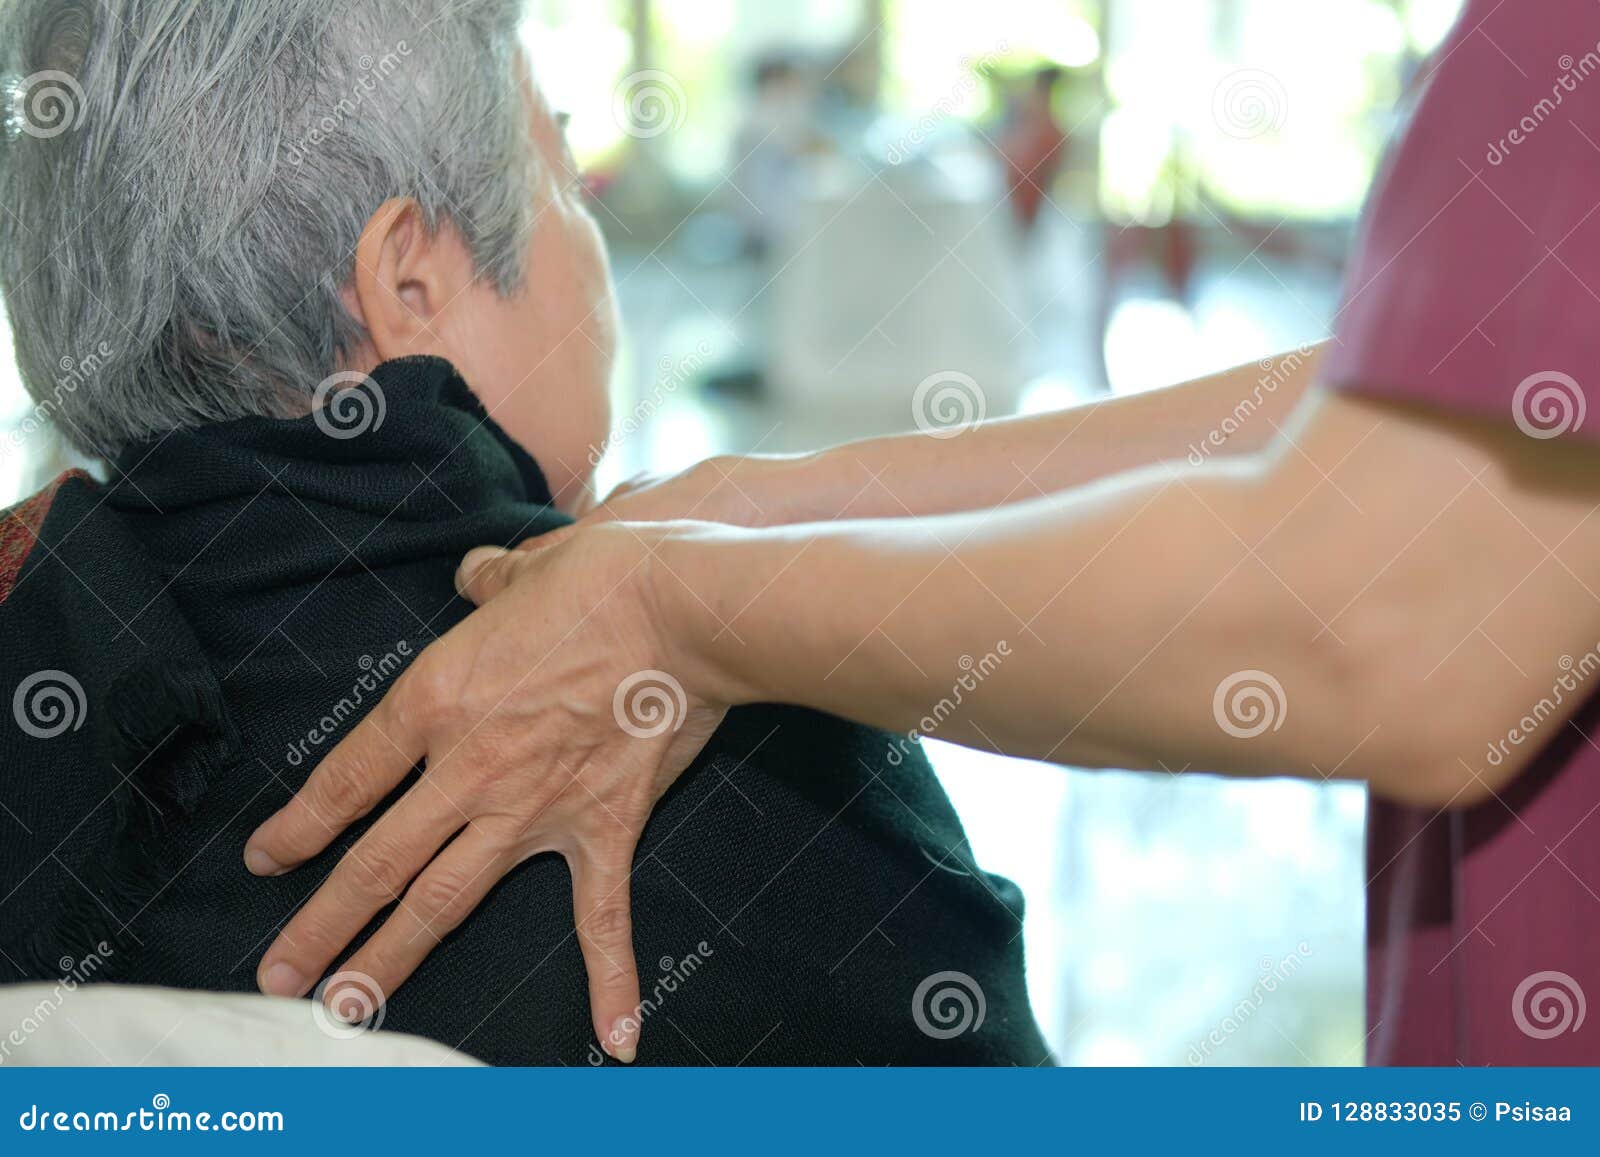 Physiotherapist Massage Old Woman Shoulder Stock Image Image Of